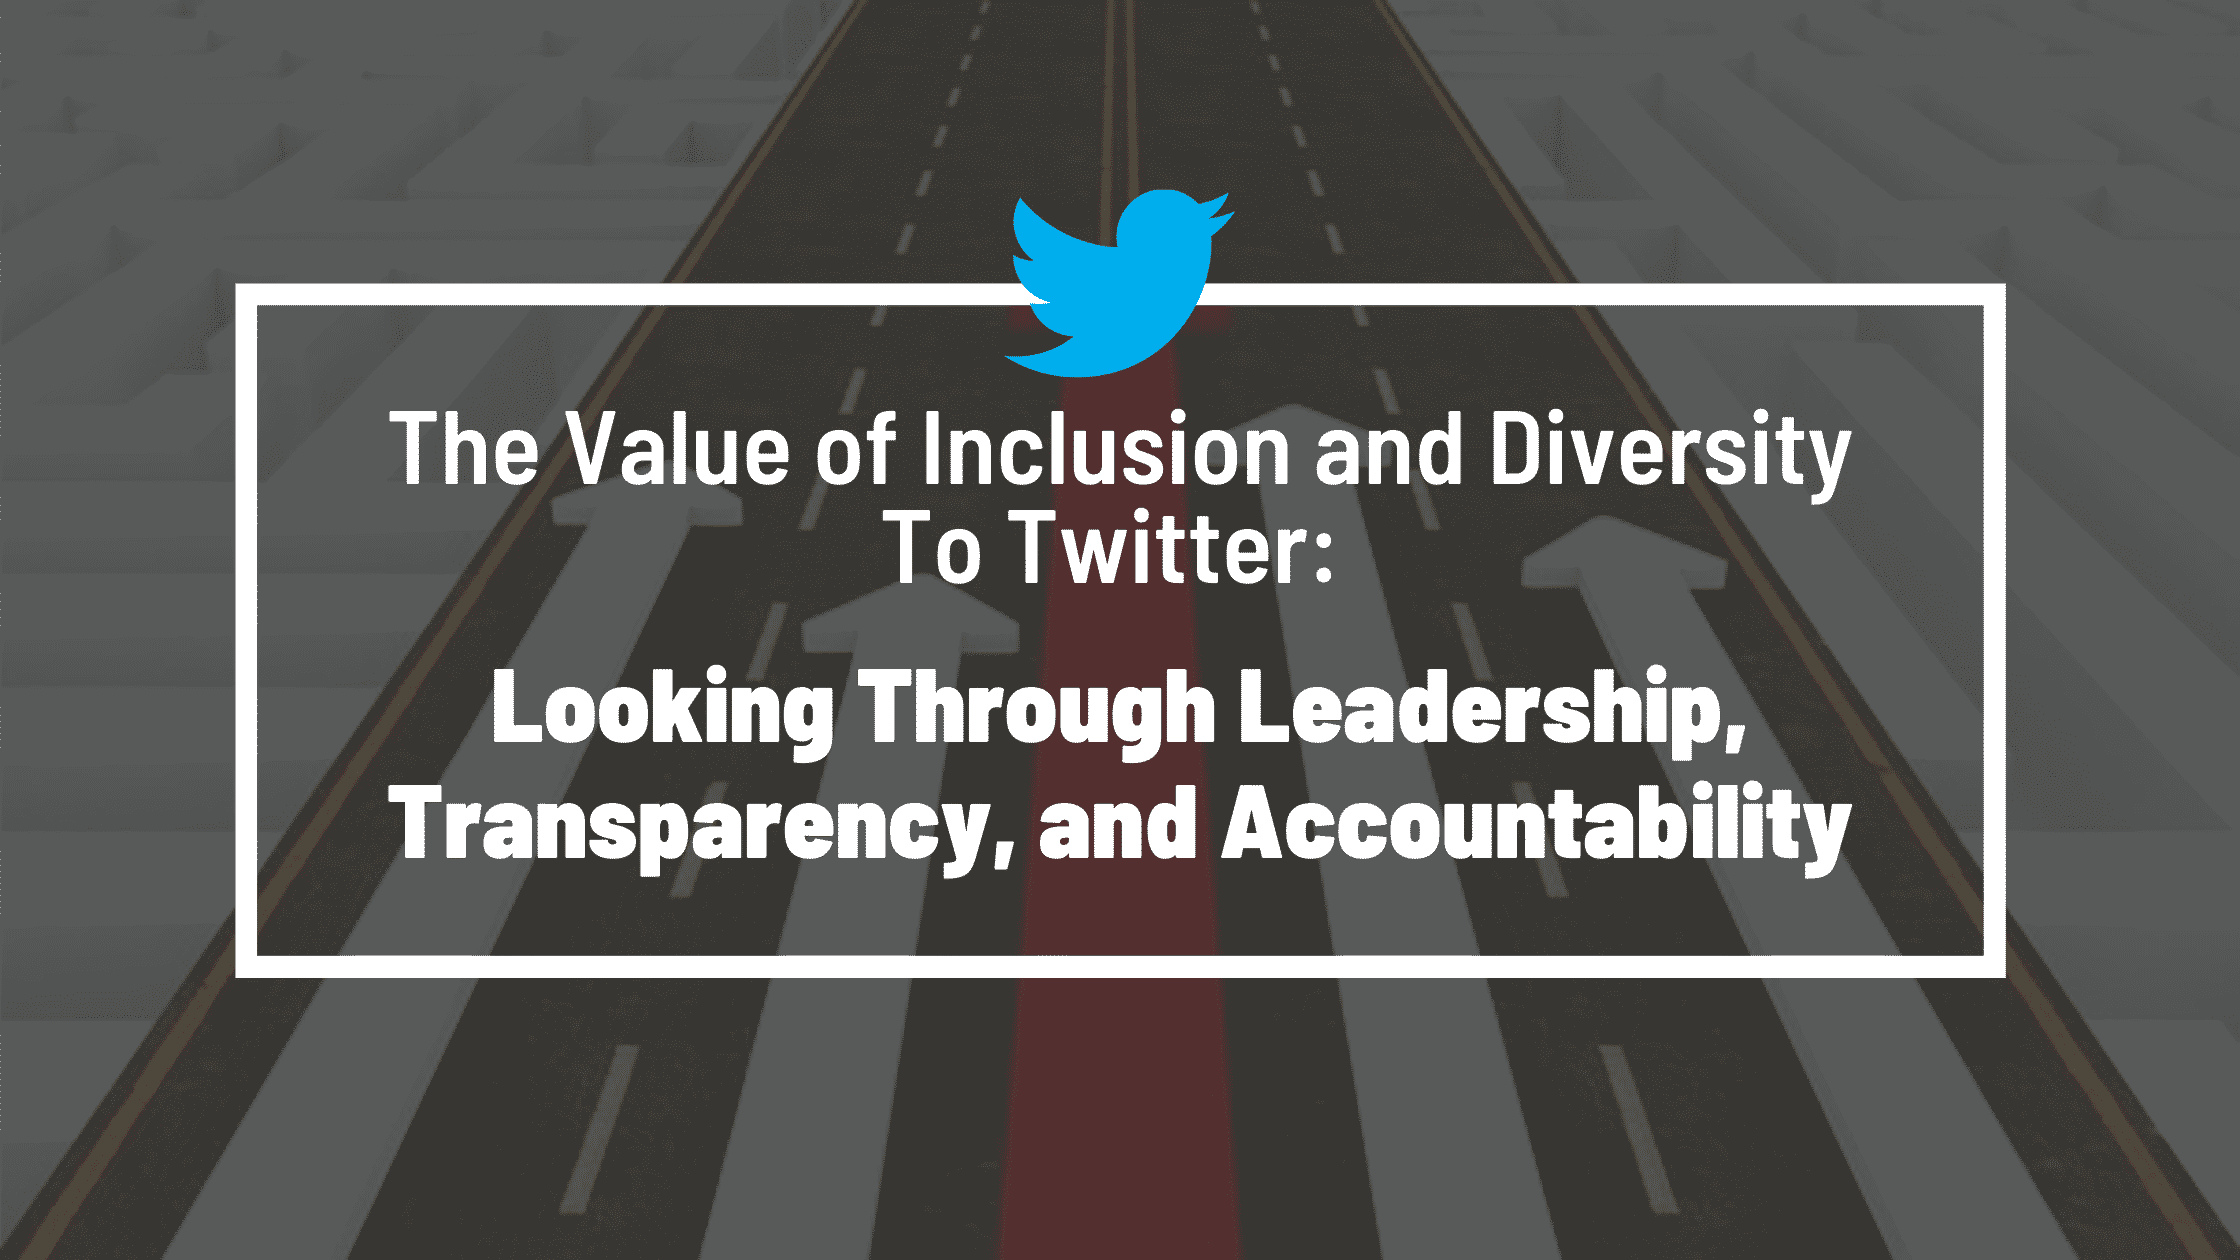 The Value of Inclusion and Diversity To Twitter: Looking Through Leadership, Transparency, and Accountability